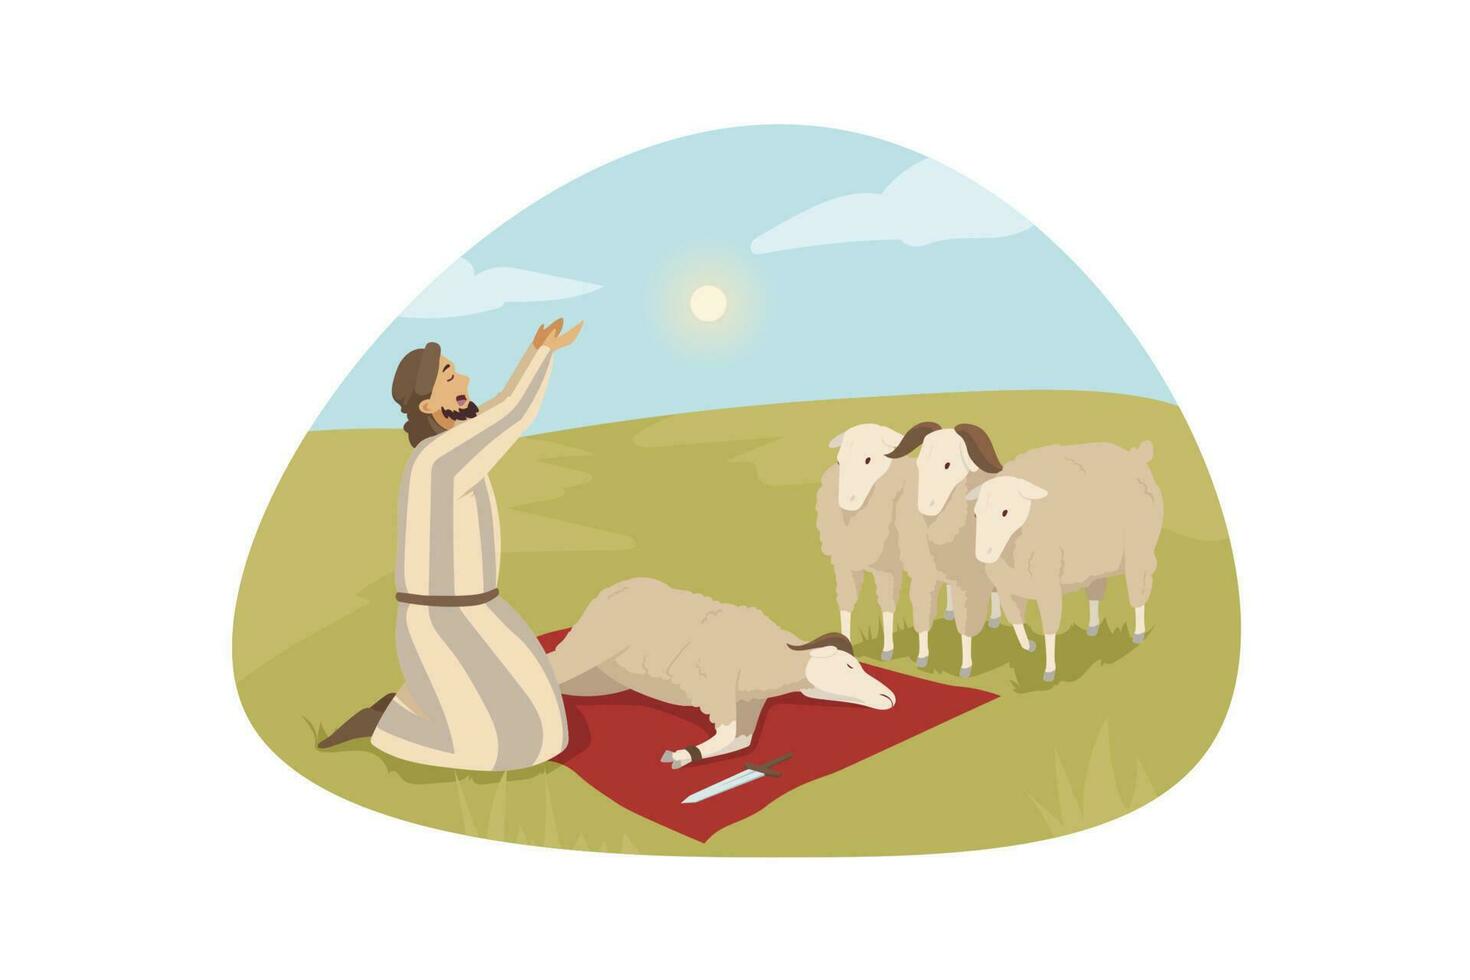 Bible, religion, character, sacrificial offering concept. Young man guy shepherd cartoon character praying to god ready for killing ship lamb as sacrifice for Lord. Old Testament biblical illustration vector